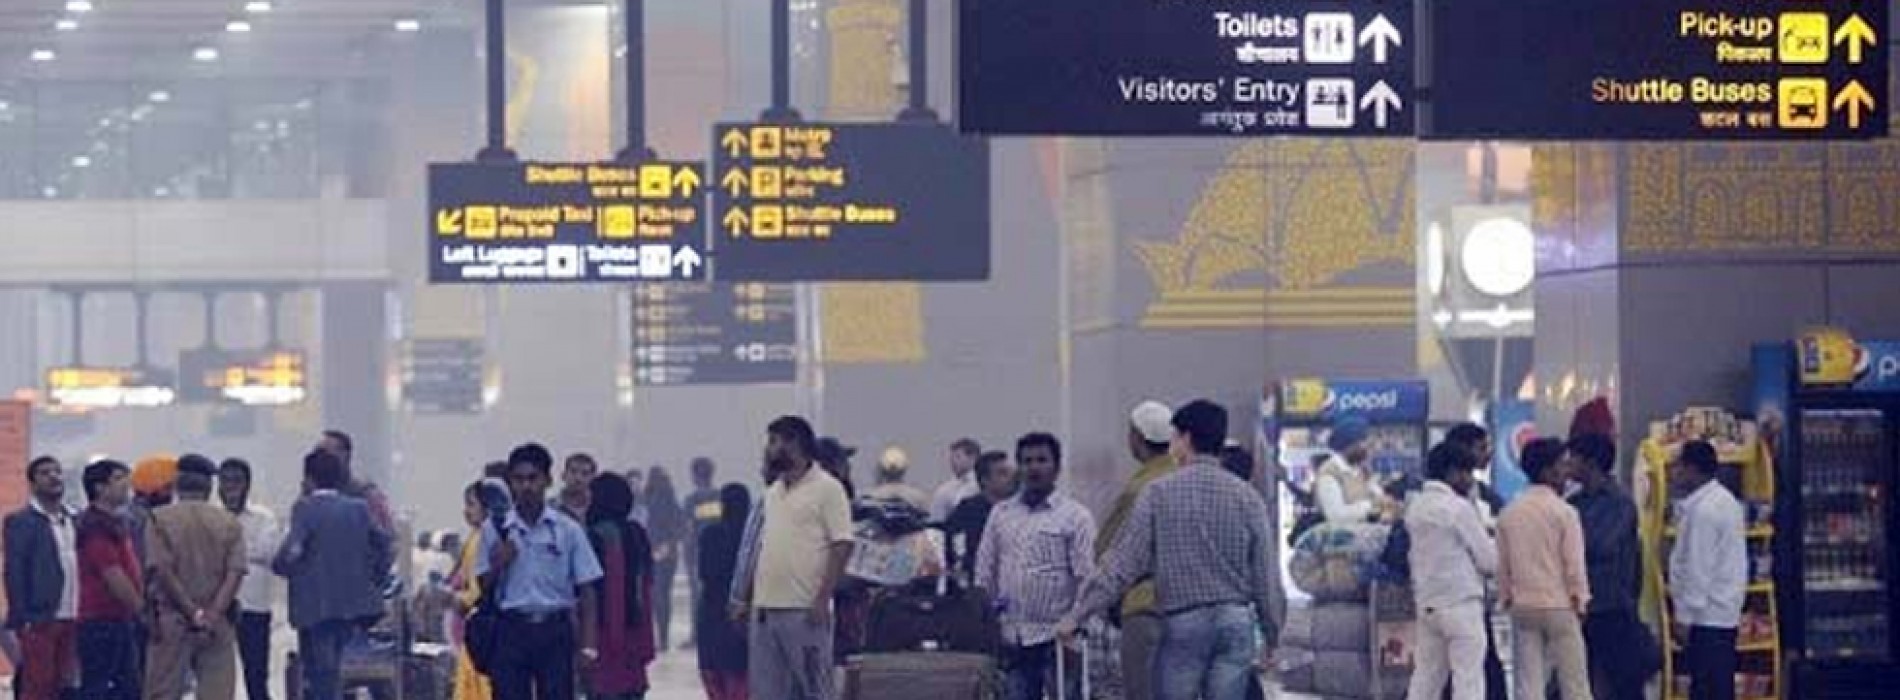 Indian airports face capacity crunch as aviation market booms